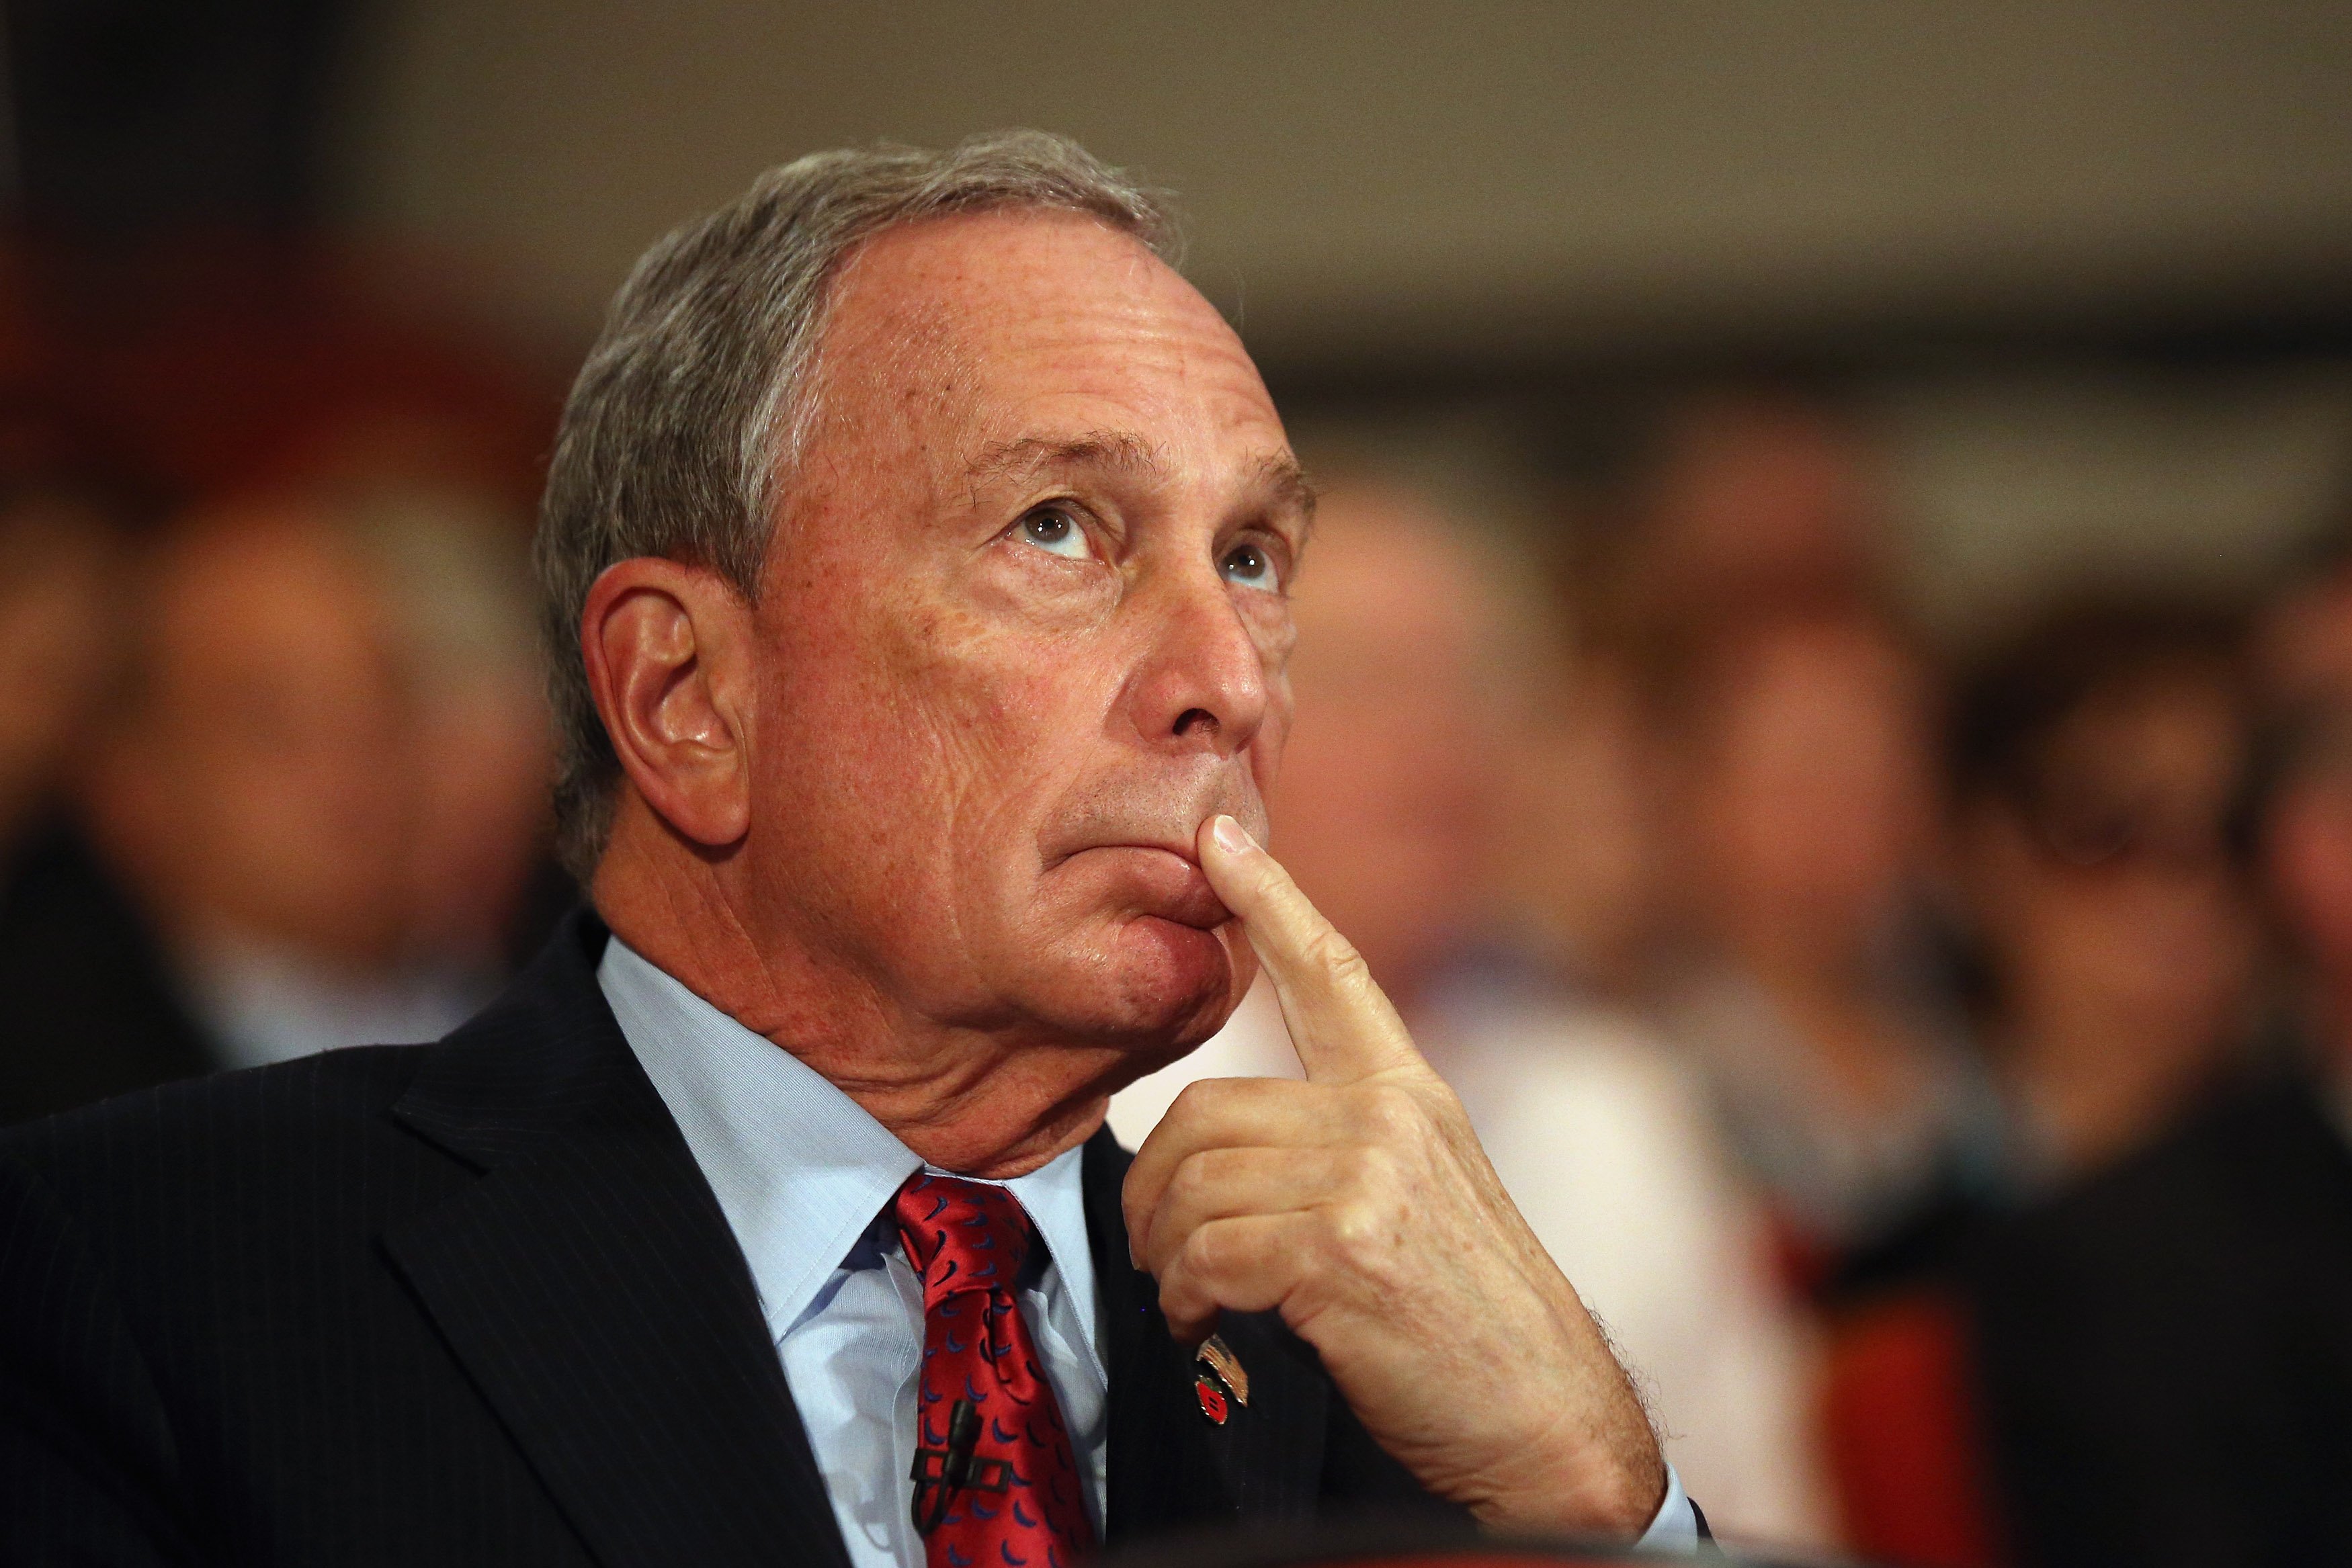 Michael Bloomberg, the Mayor of New York City ... (Photo by Oli Scarff/Getty Images)